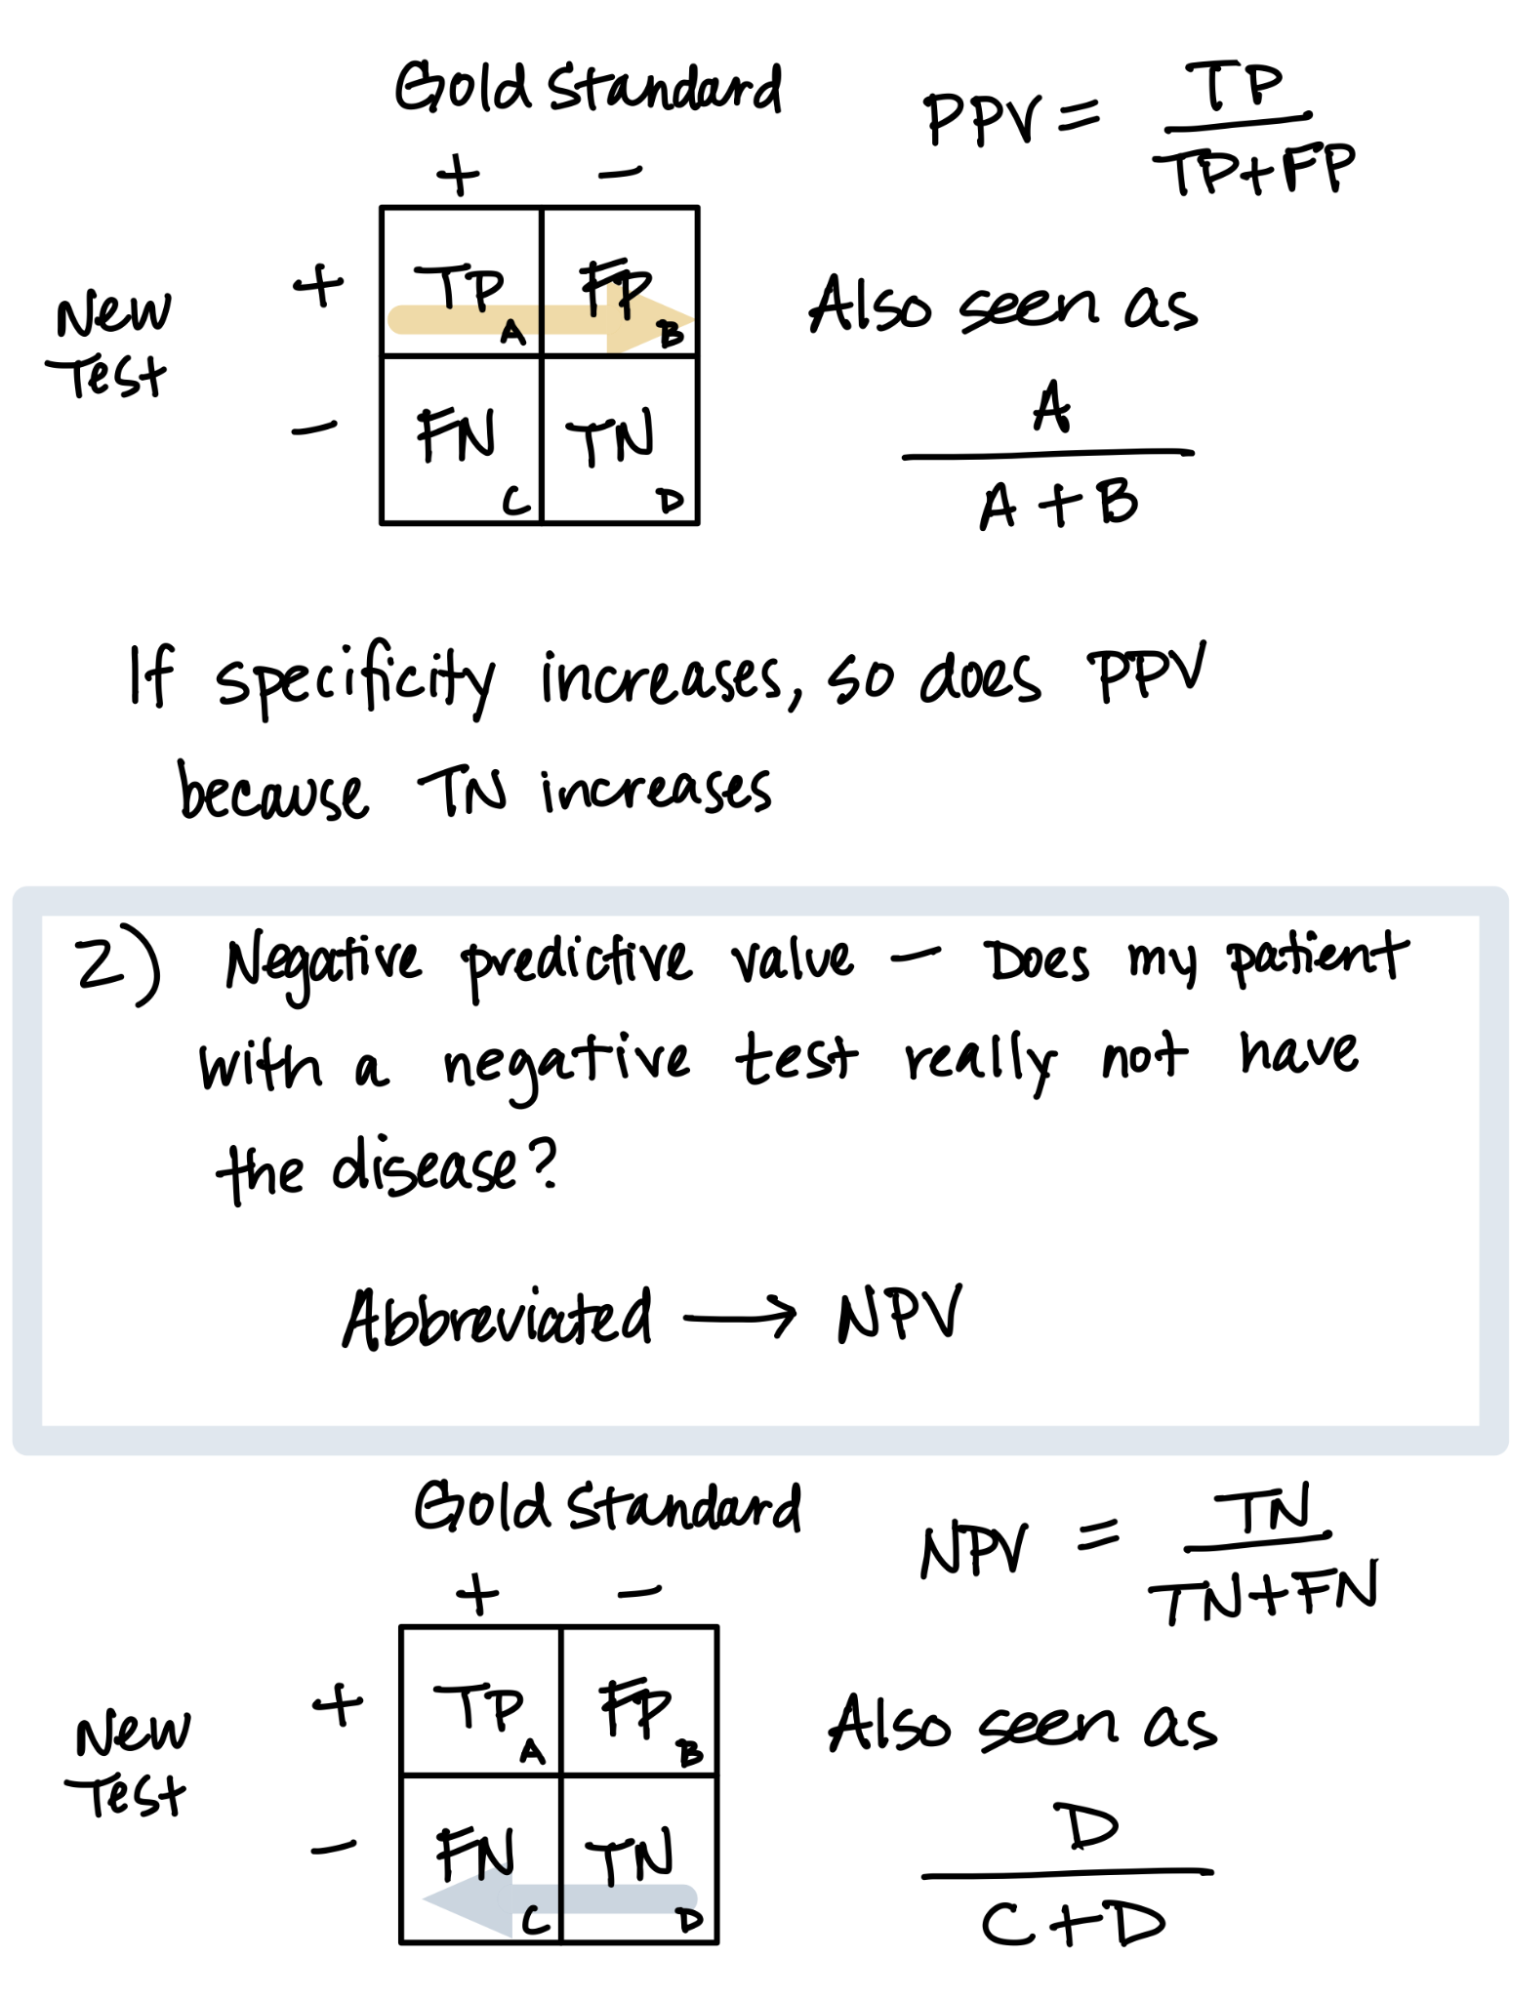 Two-by-two table with new test and gold standard (as found in Chapter 3 Part 1 Summary). PPV equals TP/(TP+FP). Also seen as A/(A+B). If specificity increases, so does PPV because TN increases. 2) Negative predictive value (NPV): Does my patient with a negative test really not have the disease? Two-by-two table with new test and gold standard. NPV equals TN/(TN+FN). Also seen as D/(C+D).